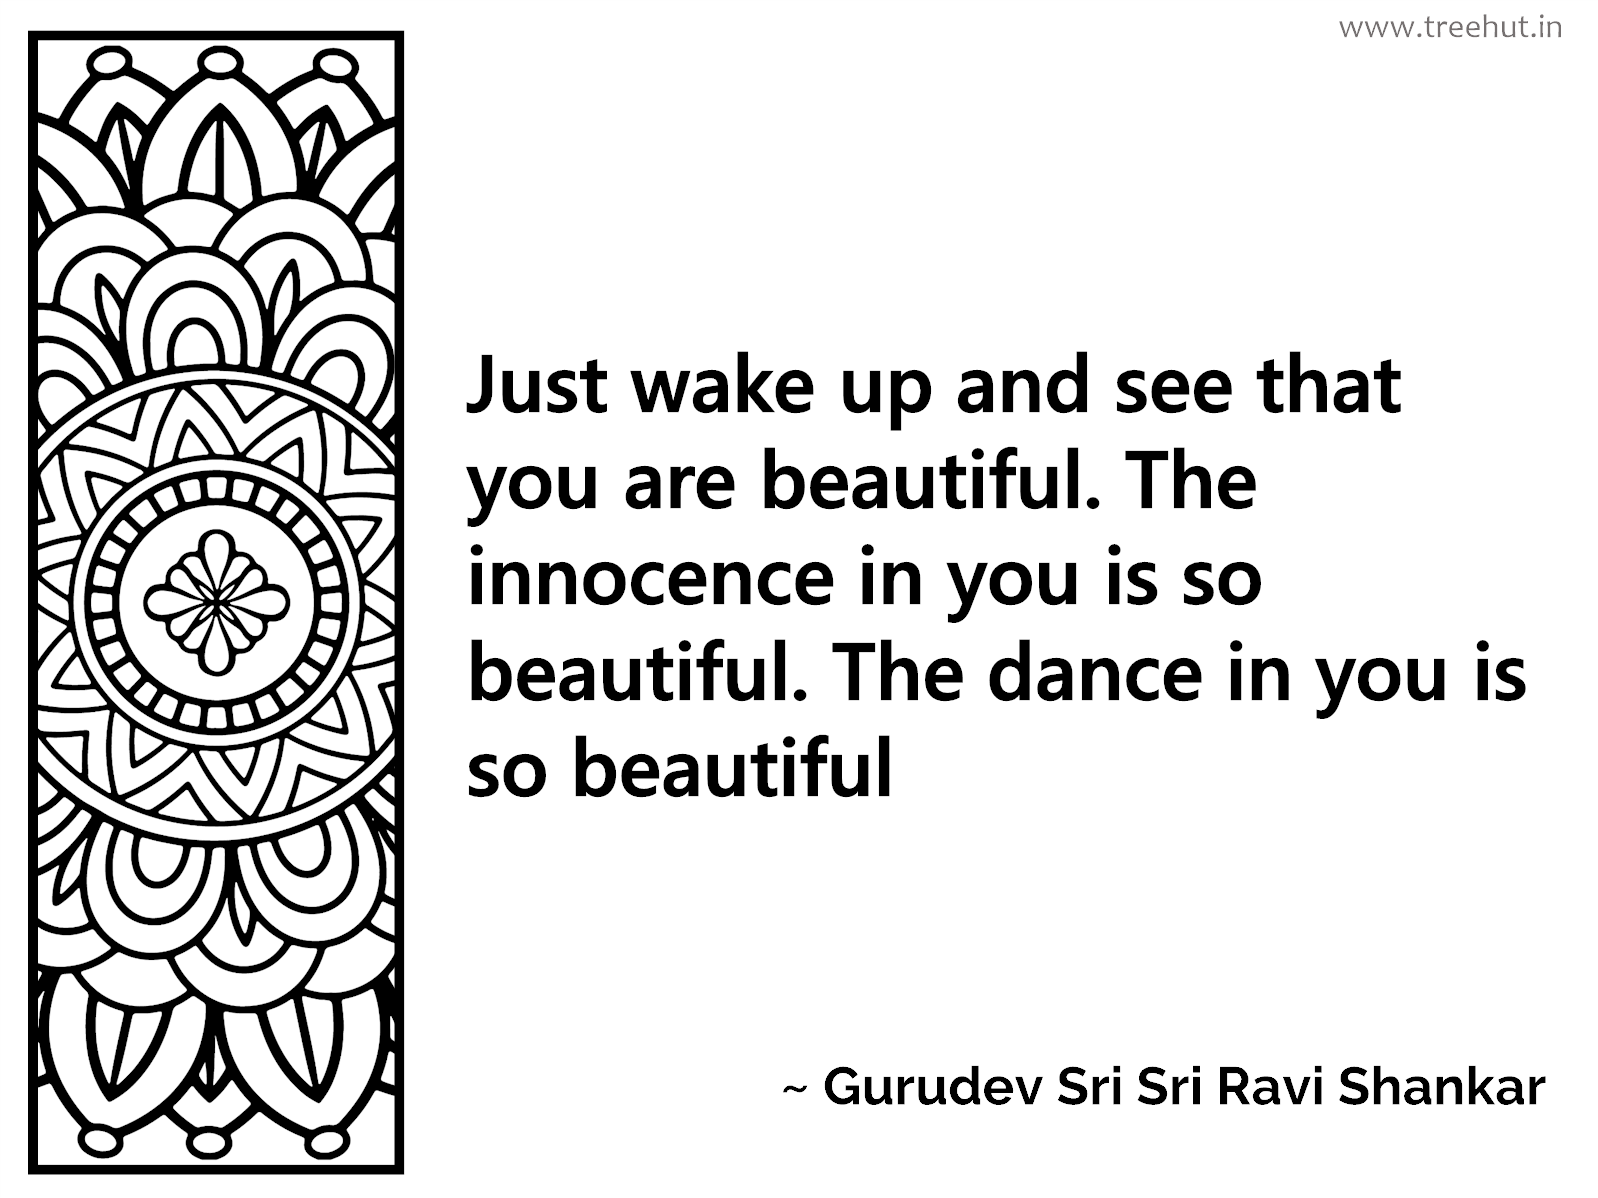 Just wake up and see that you are beautiful. The innocence in you is so beautiful. The dance in you is so beautiful Inspirational Quote by Gurudev Sri Sri Ravi Shankar, coloring pages